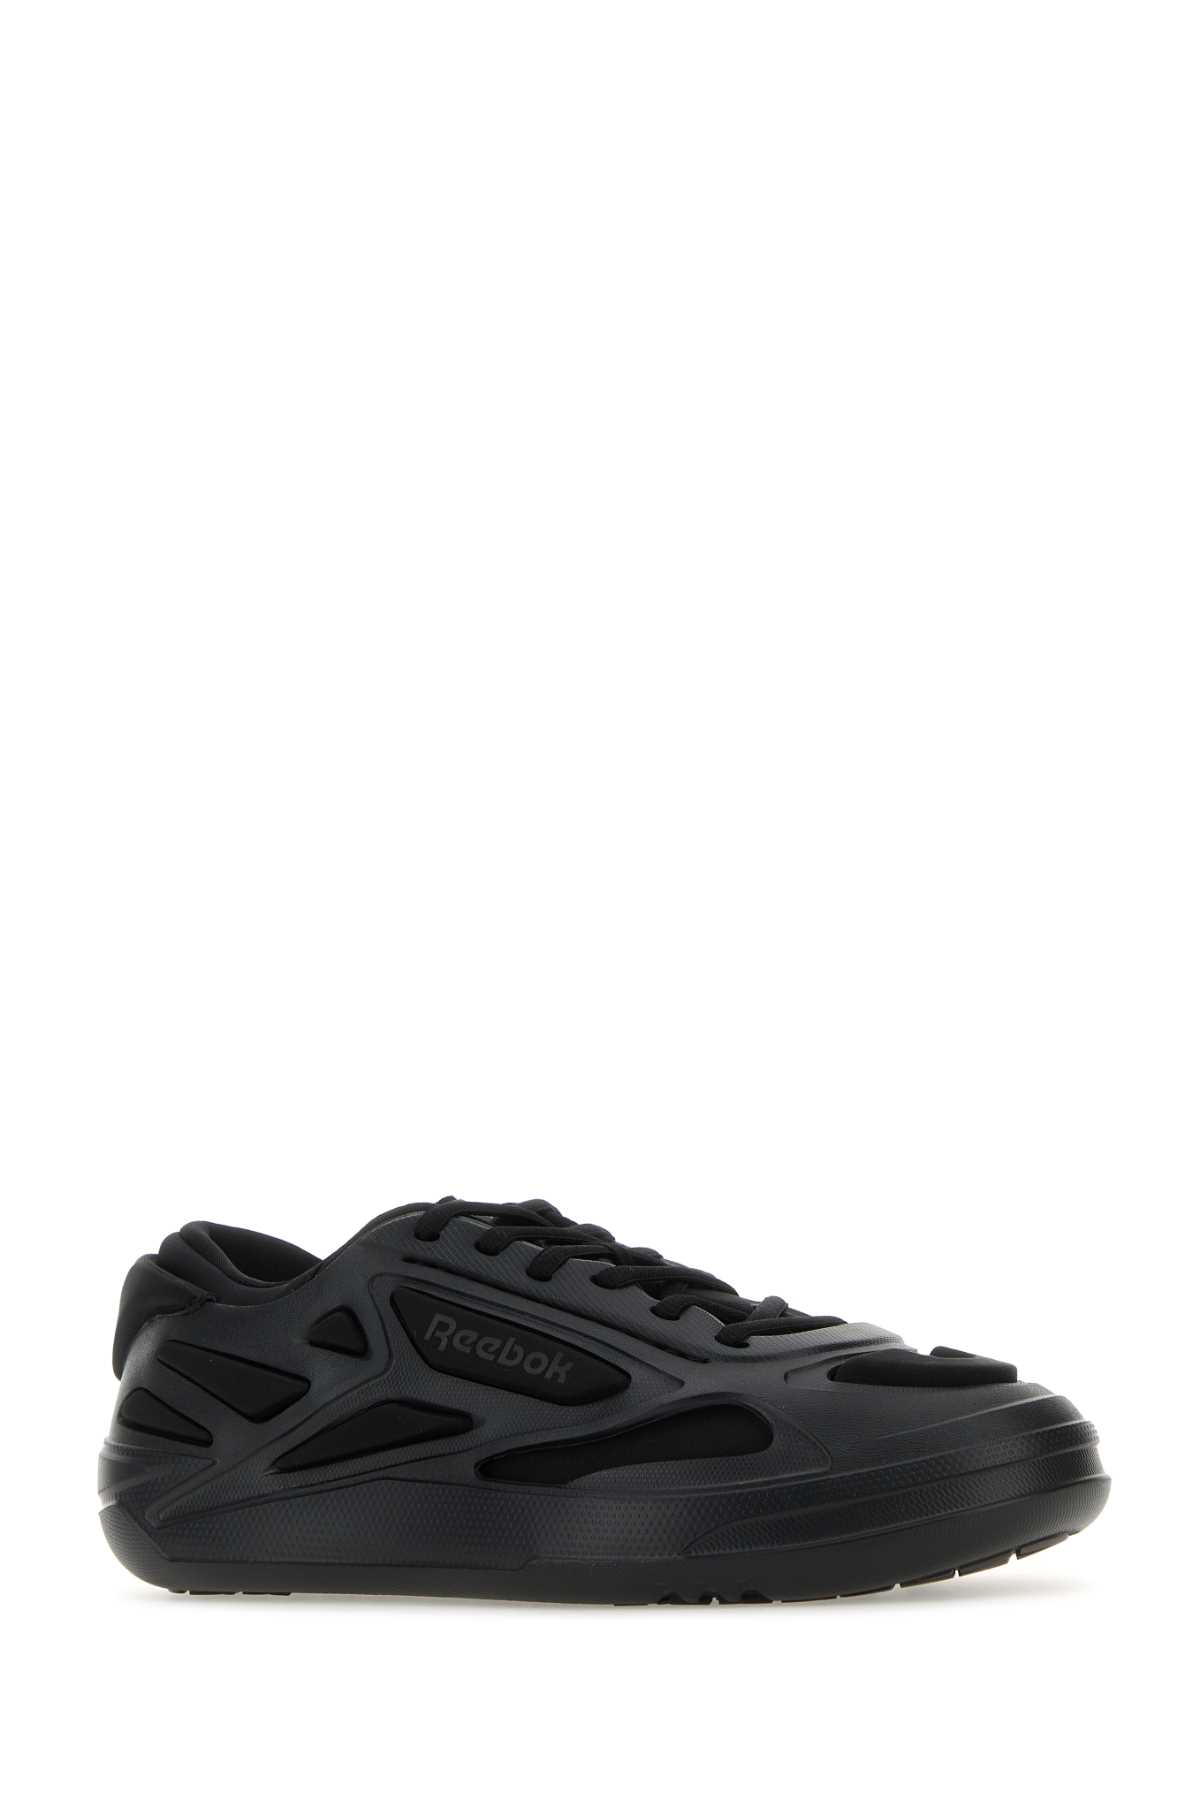 Reebok Black Fabric And Rubber Future Club C Sneakers